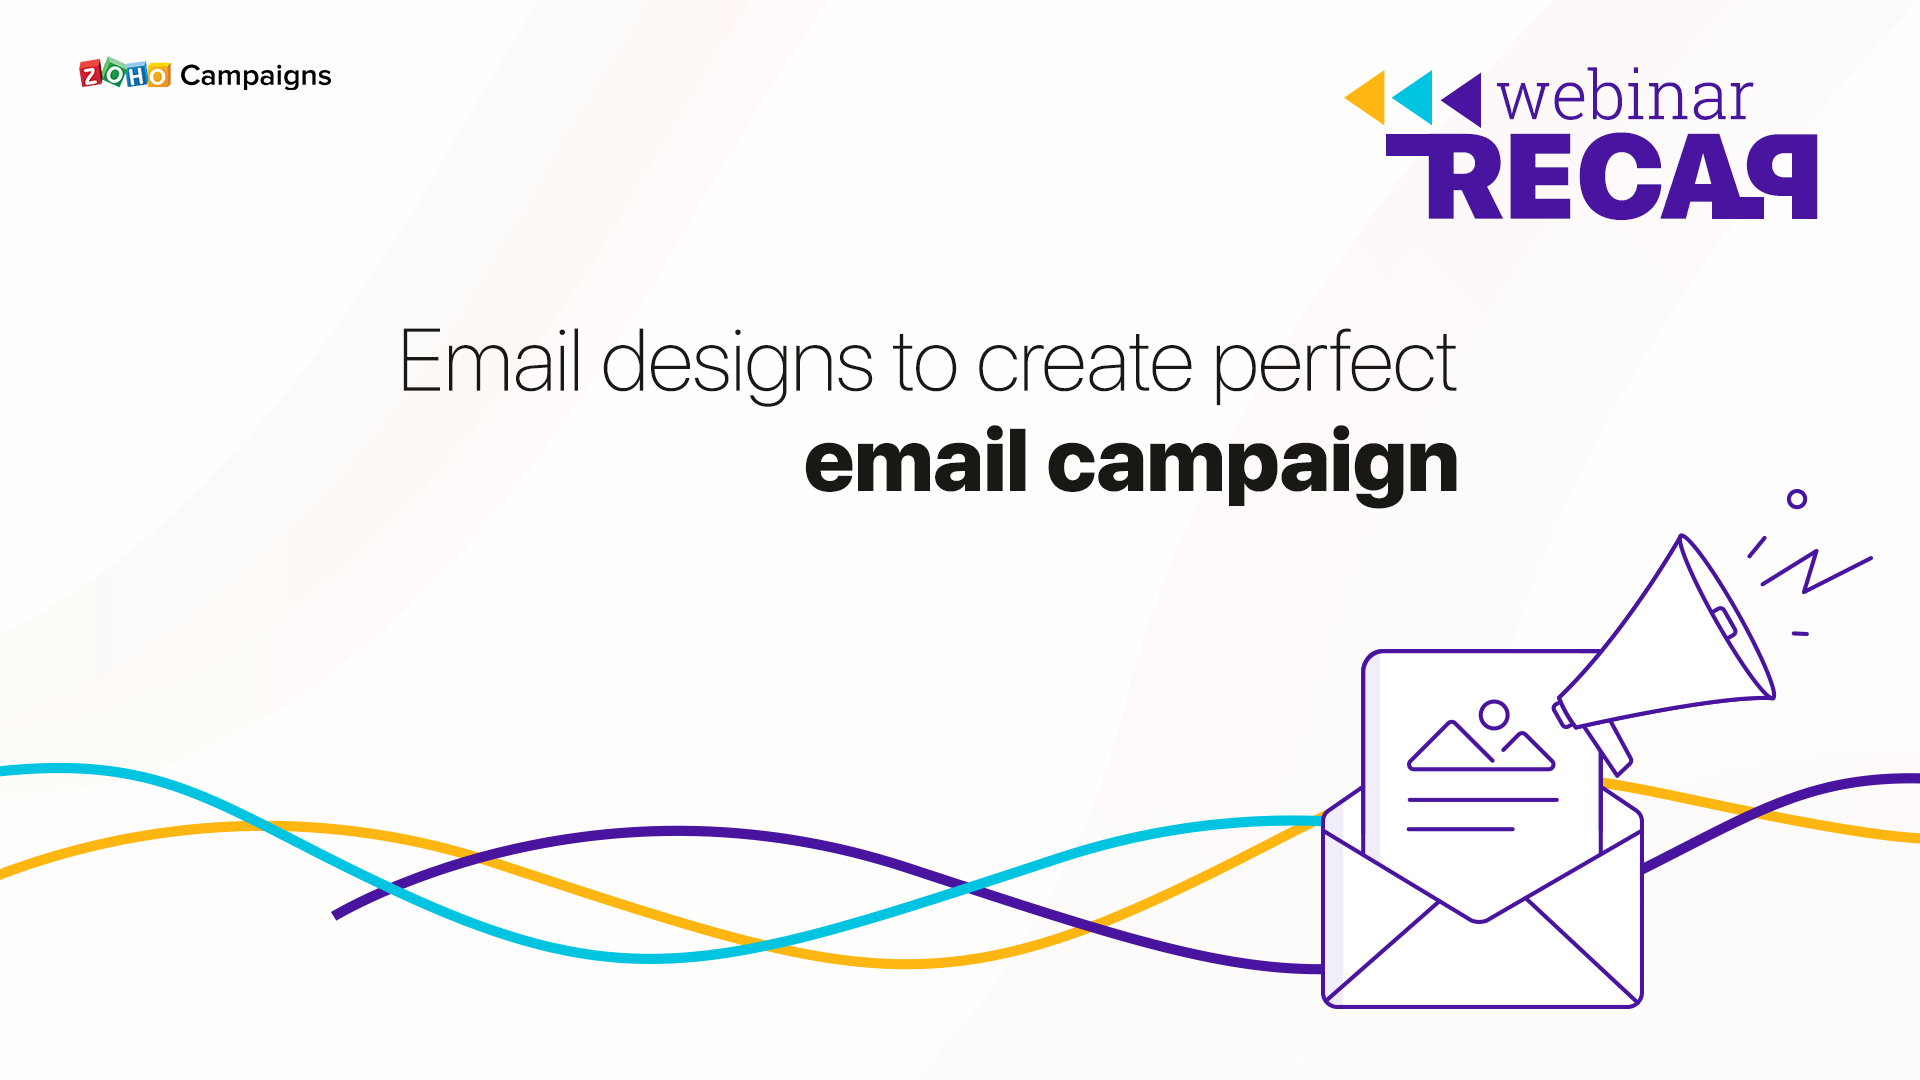 Webinar recap: Email designs to create perfect email campaign